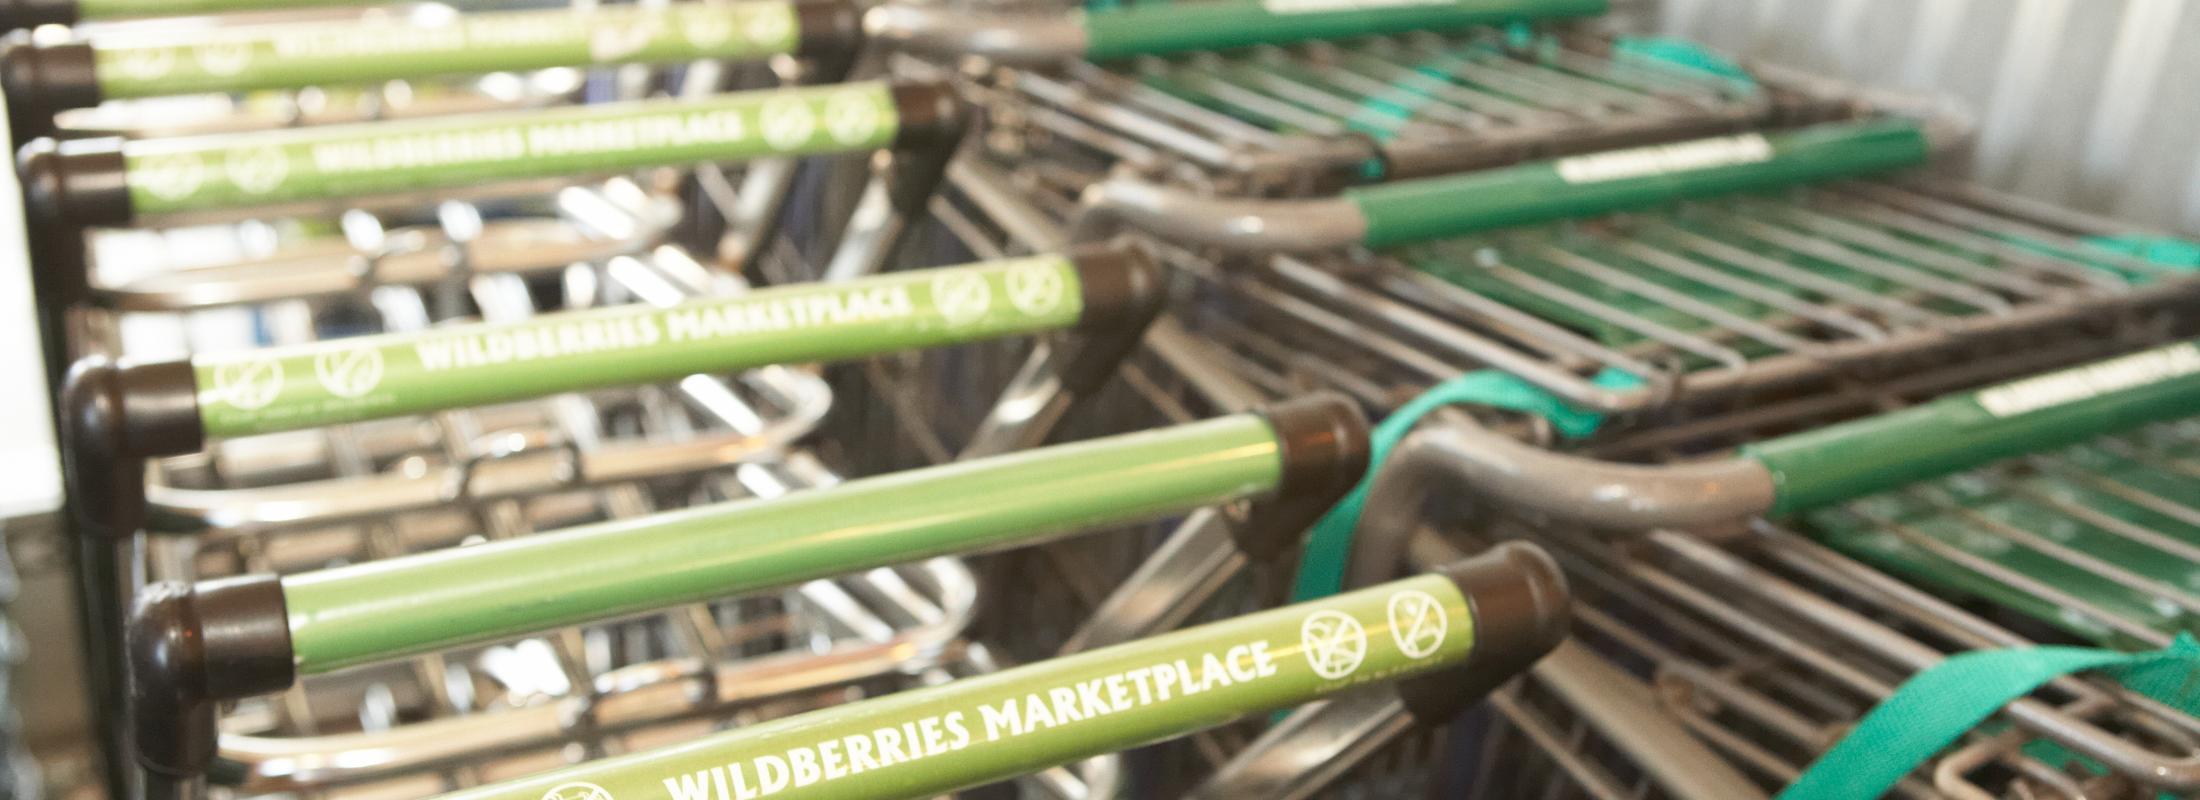 Wildberries Shopping Carts